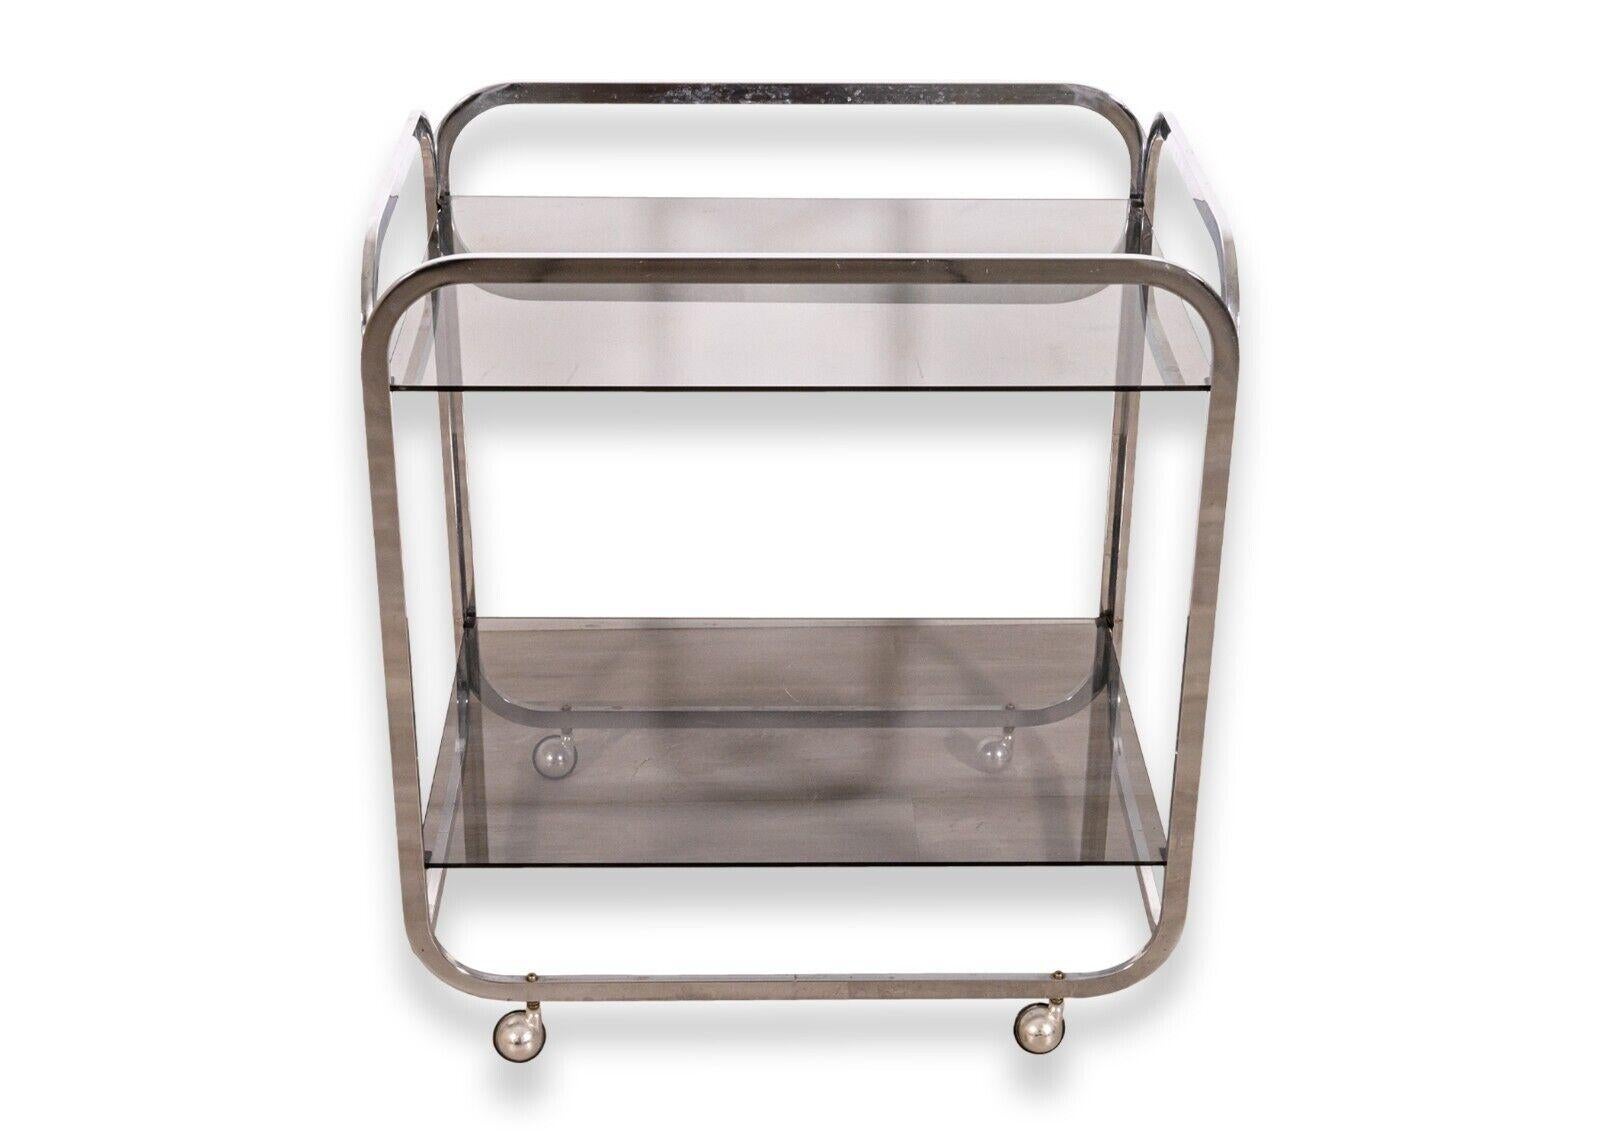 A two tier smoked glass and chrome rolling bar cart. A beautiful contemporary modern bar cart, a perfect addition to your modern dining room, kitchen, or office. This piece features a full chrome metal construction with two clean, smoked glass